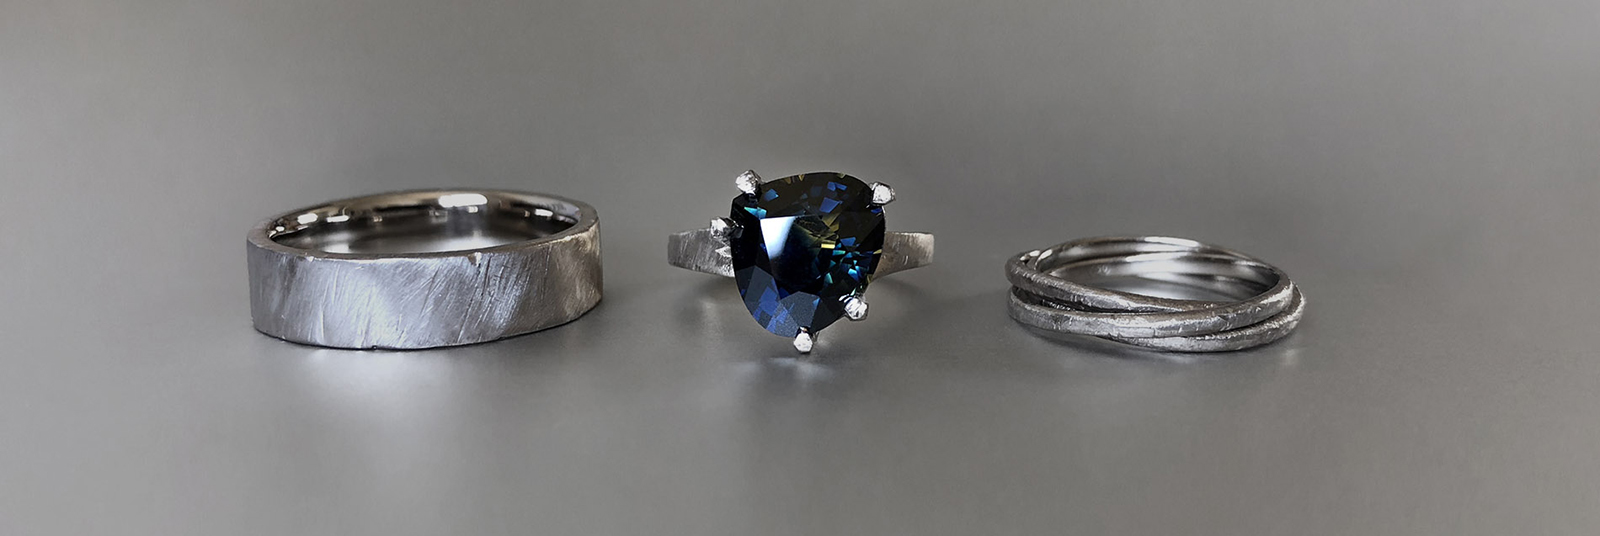 Australian parti sapphire alternative engagement ring and wedding bands